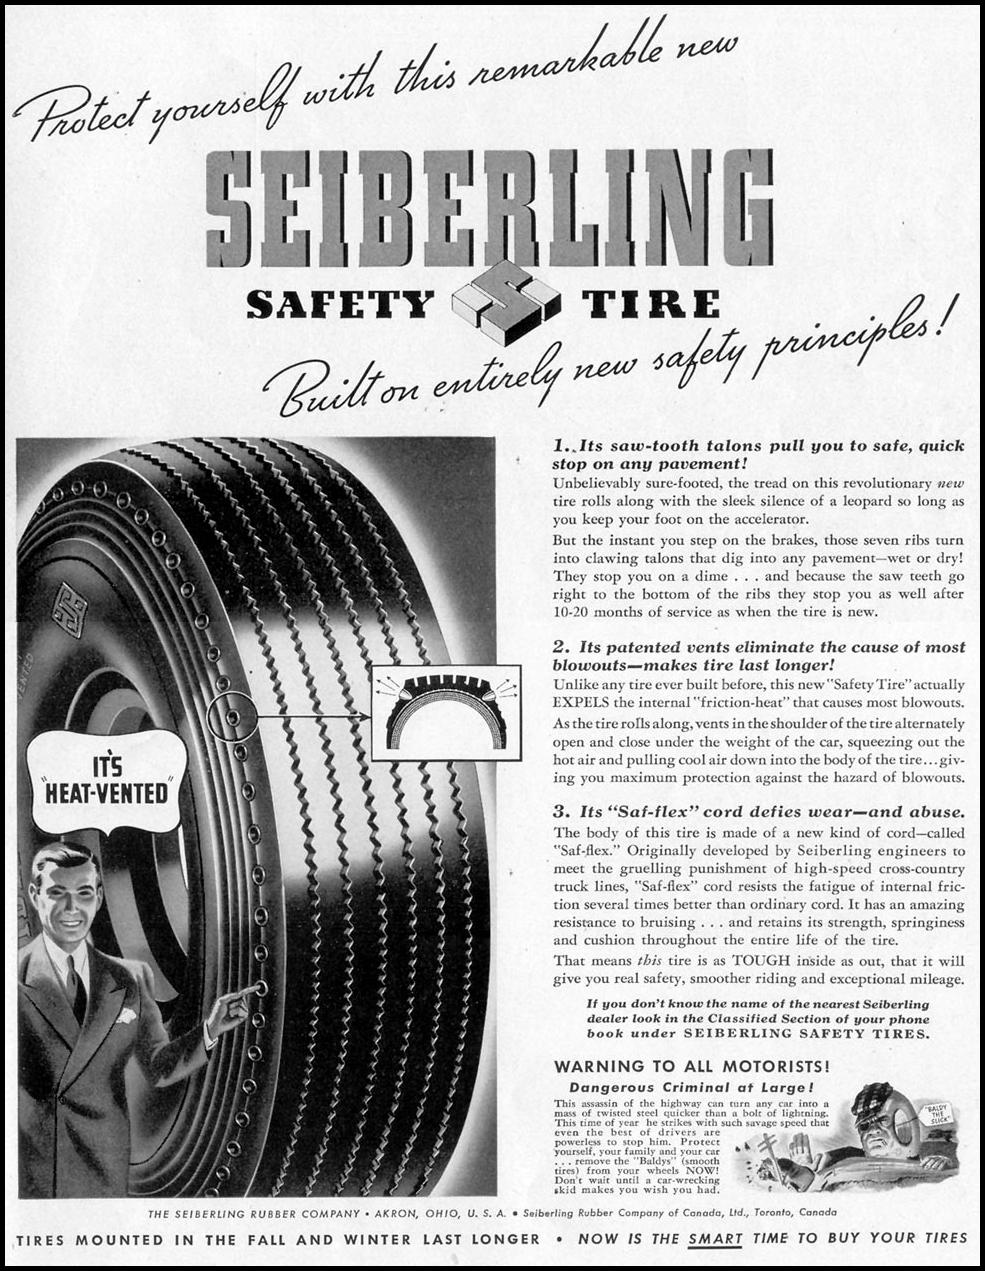 SEIBERLING SAFETY TIRE
LIFE
12/12/1938
p. 63